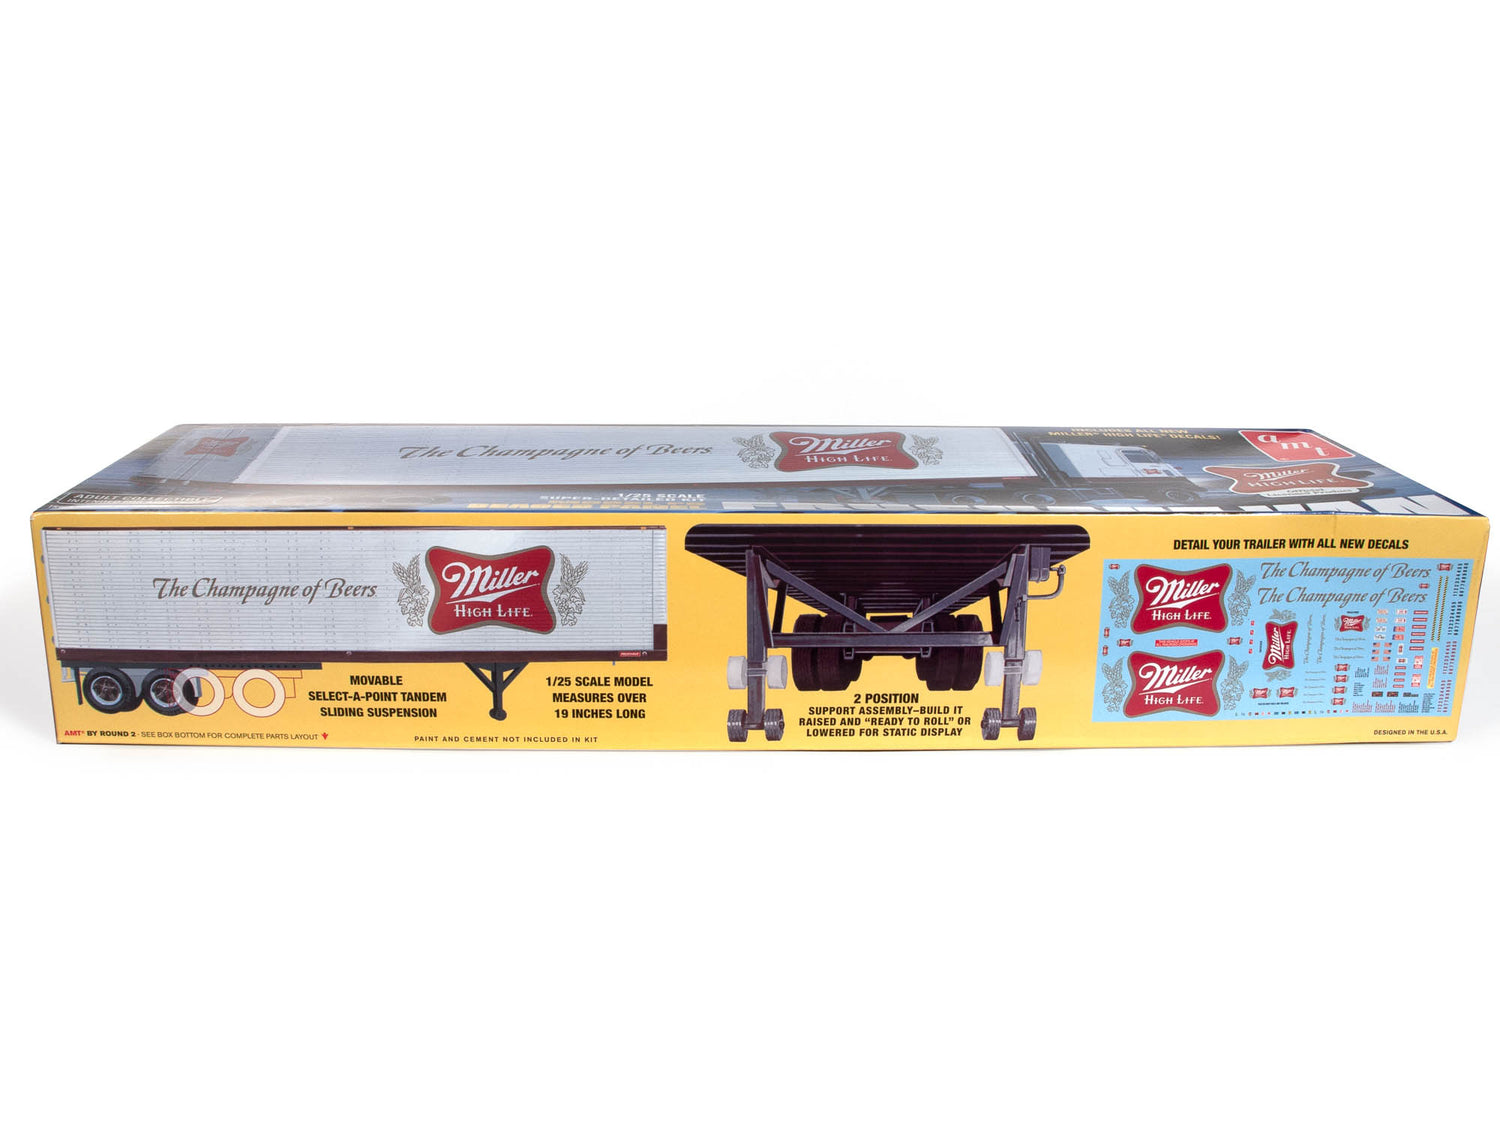 Movable Select-A-Point Tandem Sliding Suspension, 1/25 Scale Model Measure over 19 inches long, 2 position support assembly-build it raised and "ready to roll" or lowered for static display, Detail your trailer with all new decals